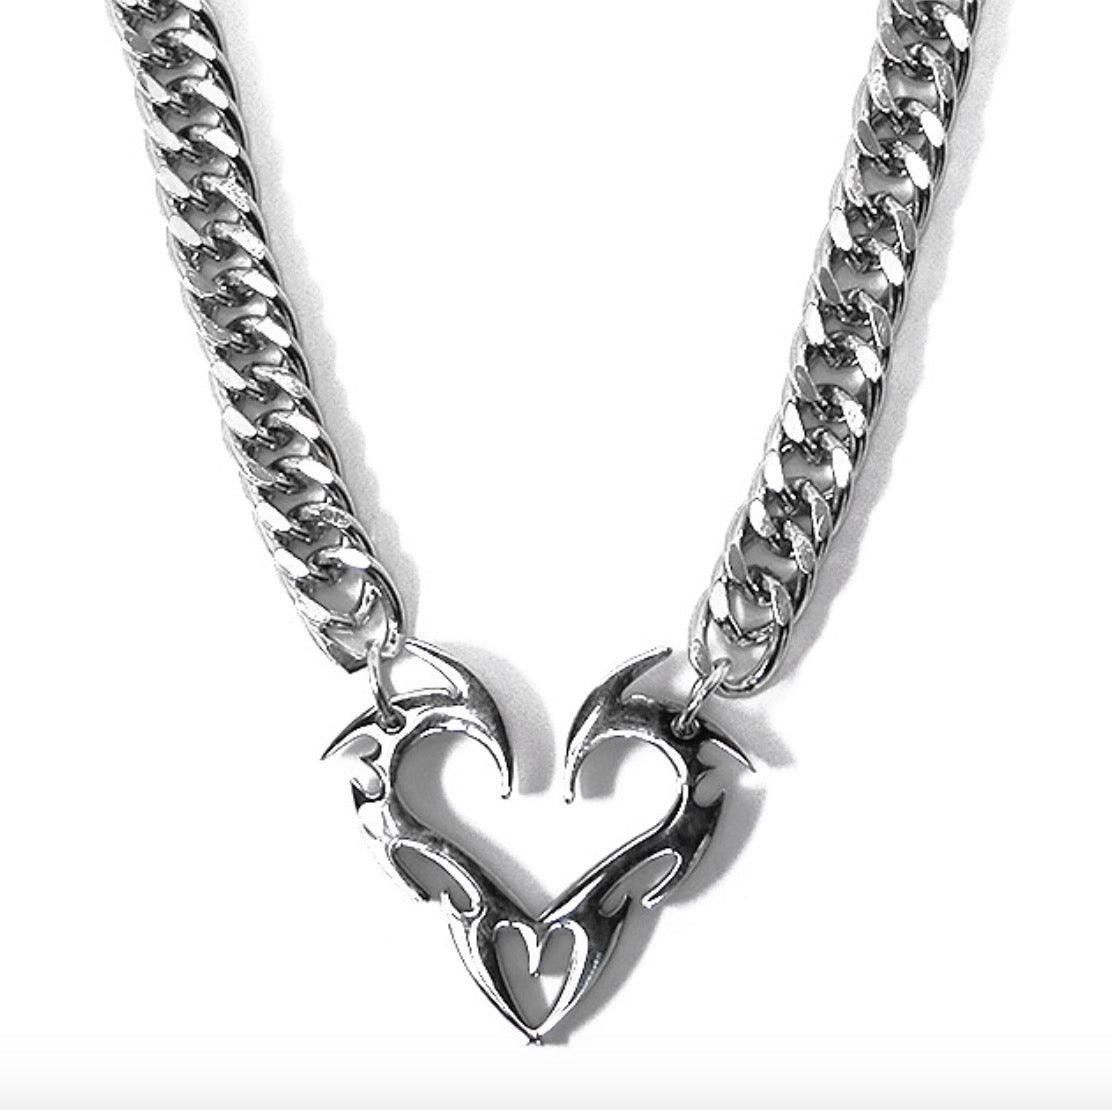 Flame Heart Pendant Necklace